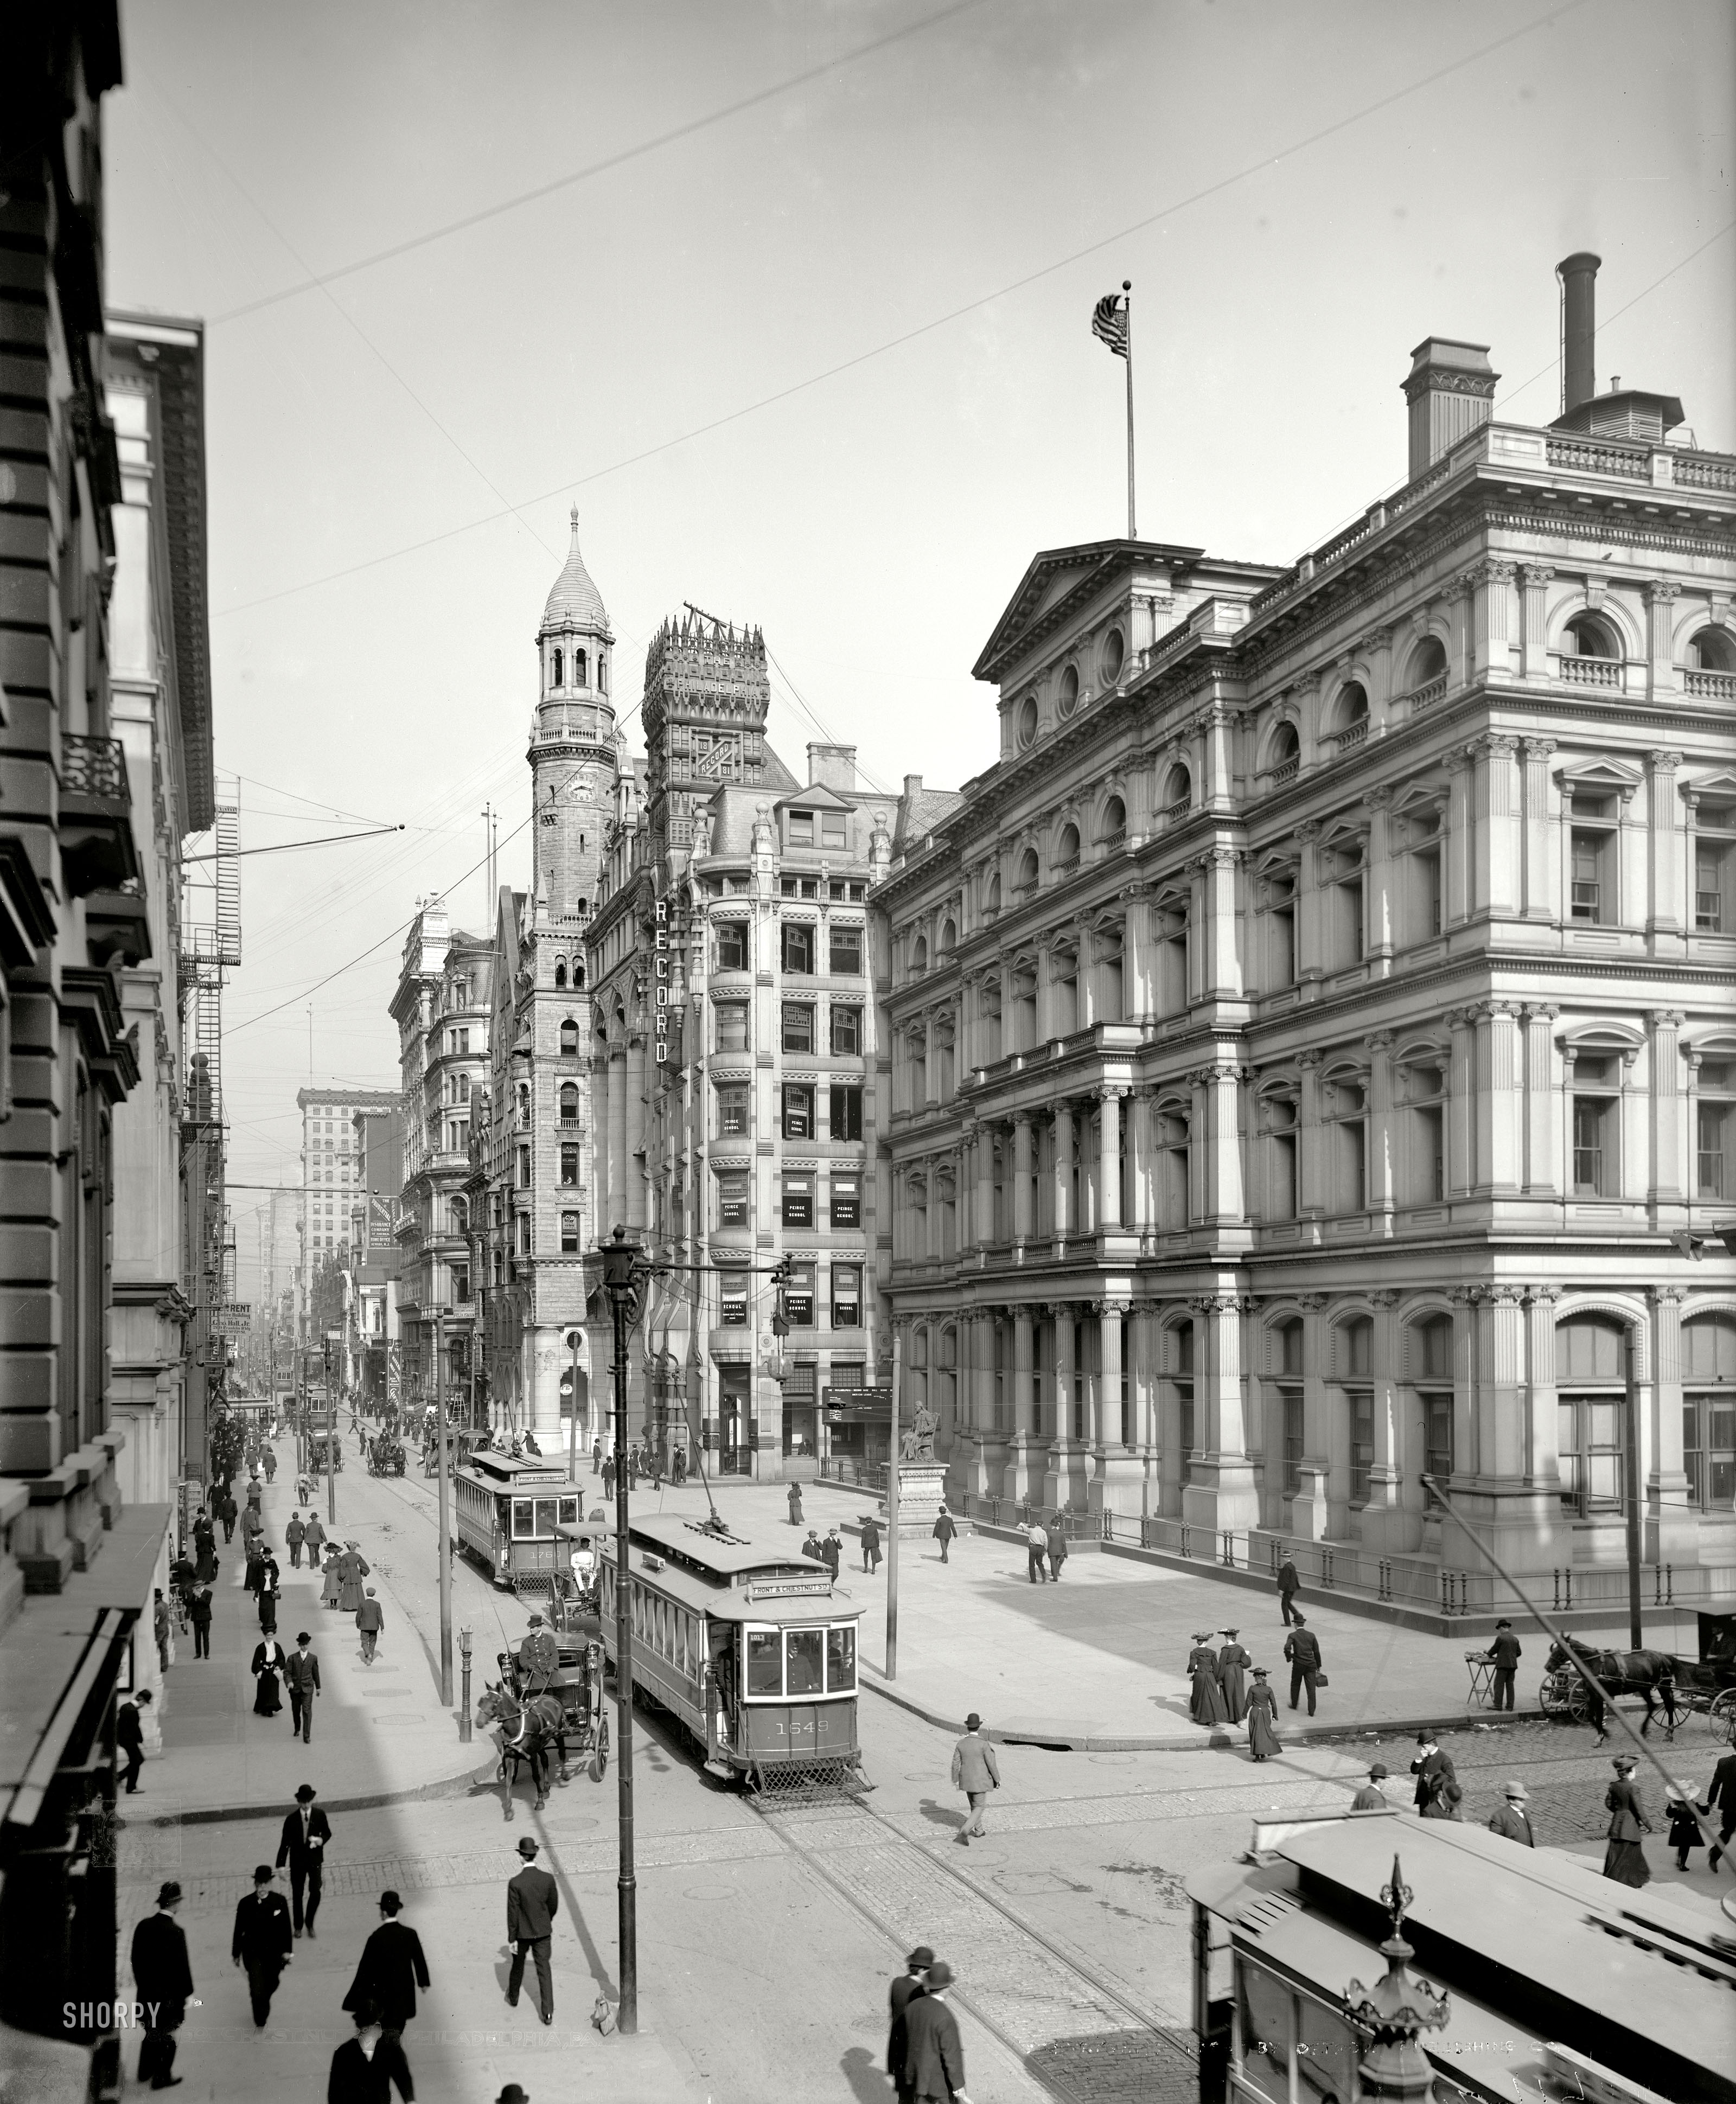 Philadelphia circa 1906. "Chestnut Street." Continuing the nutty theme of recent posts. 8x10 inch dry plate glass negative, Detroit Publishing Co. View full size.